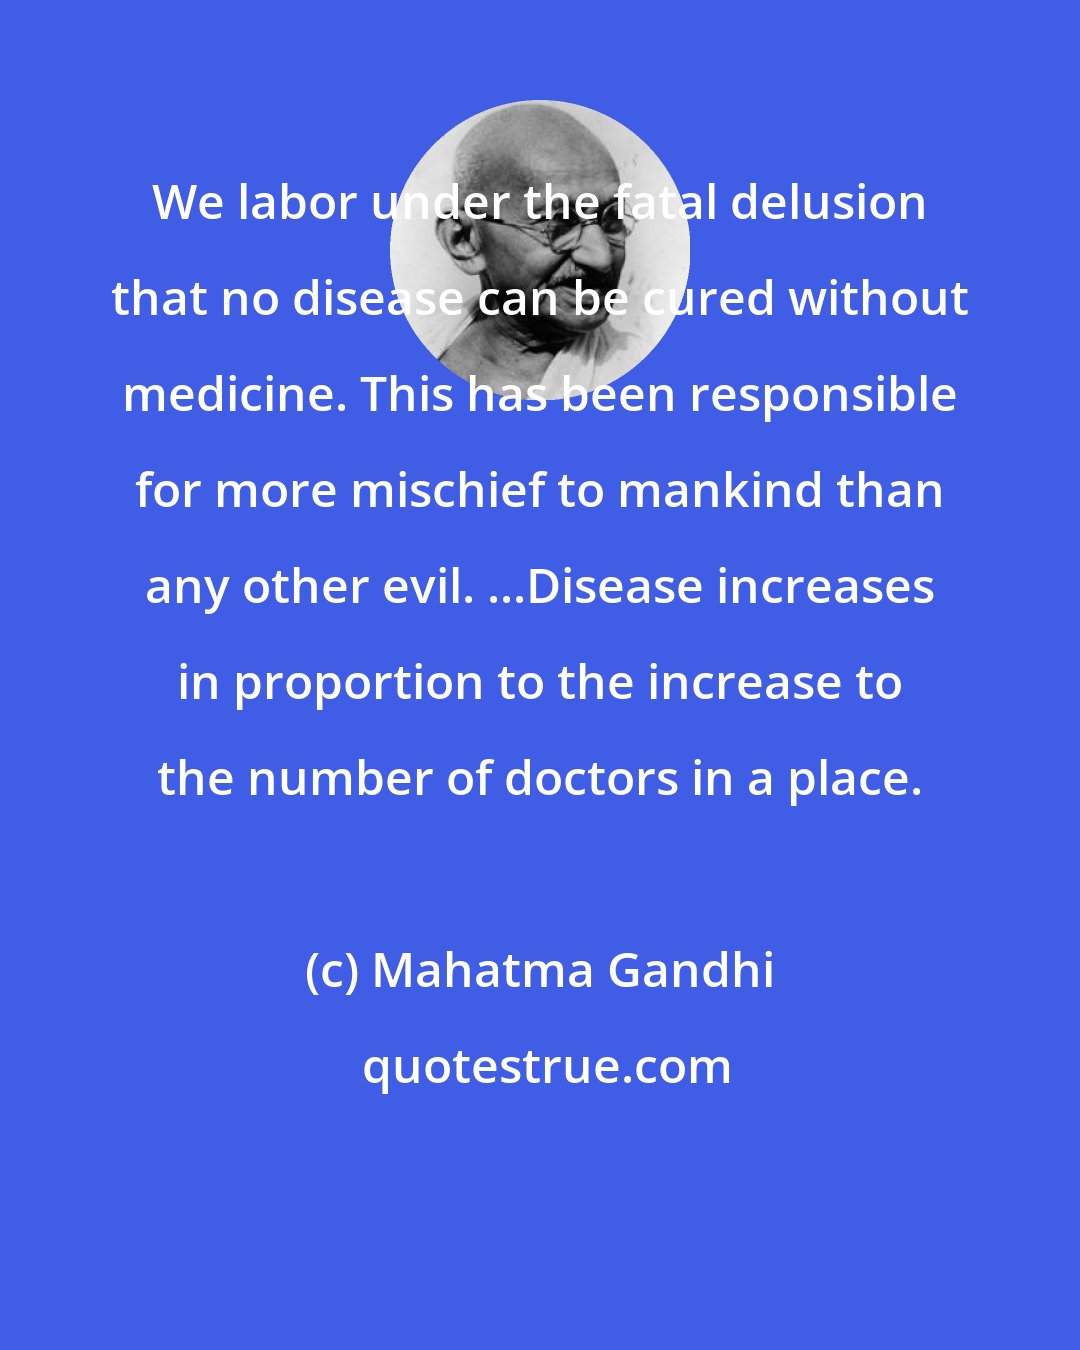 Mahatma Gandhi: We labor under the fatal delusion that no disease can be cured without medicine. This has been responsible for more mischief to mankind than any other evil. ...Disease increases in proportion to the increase to the number of doctors in a place.